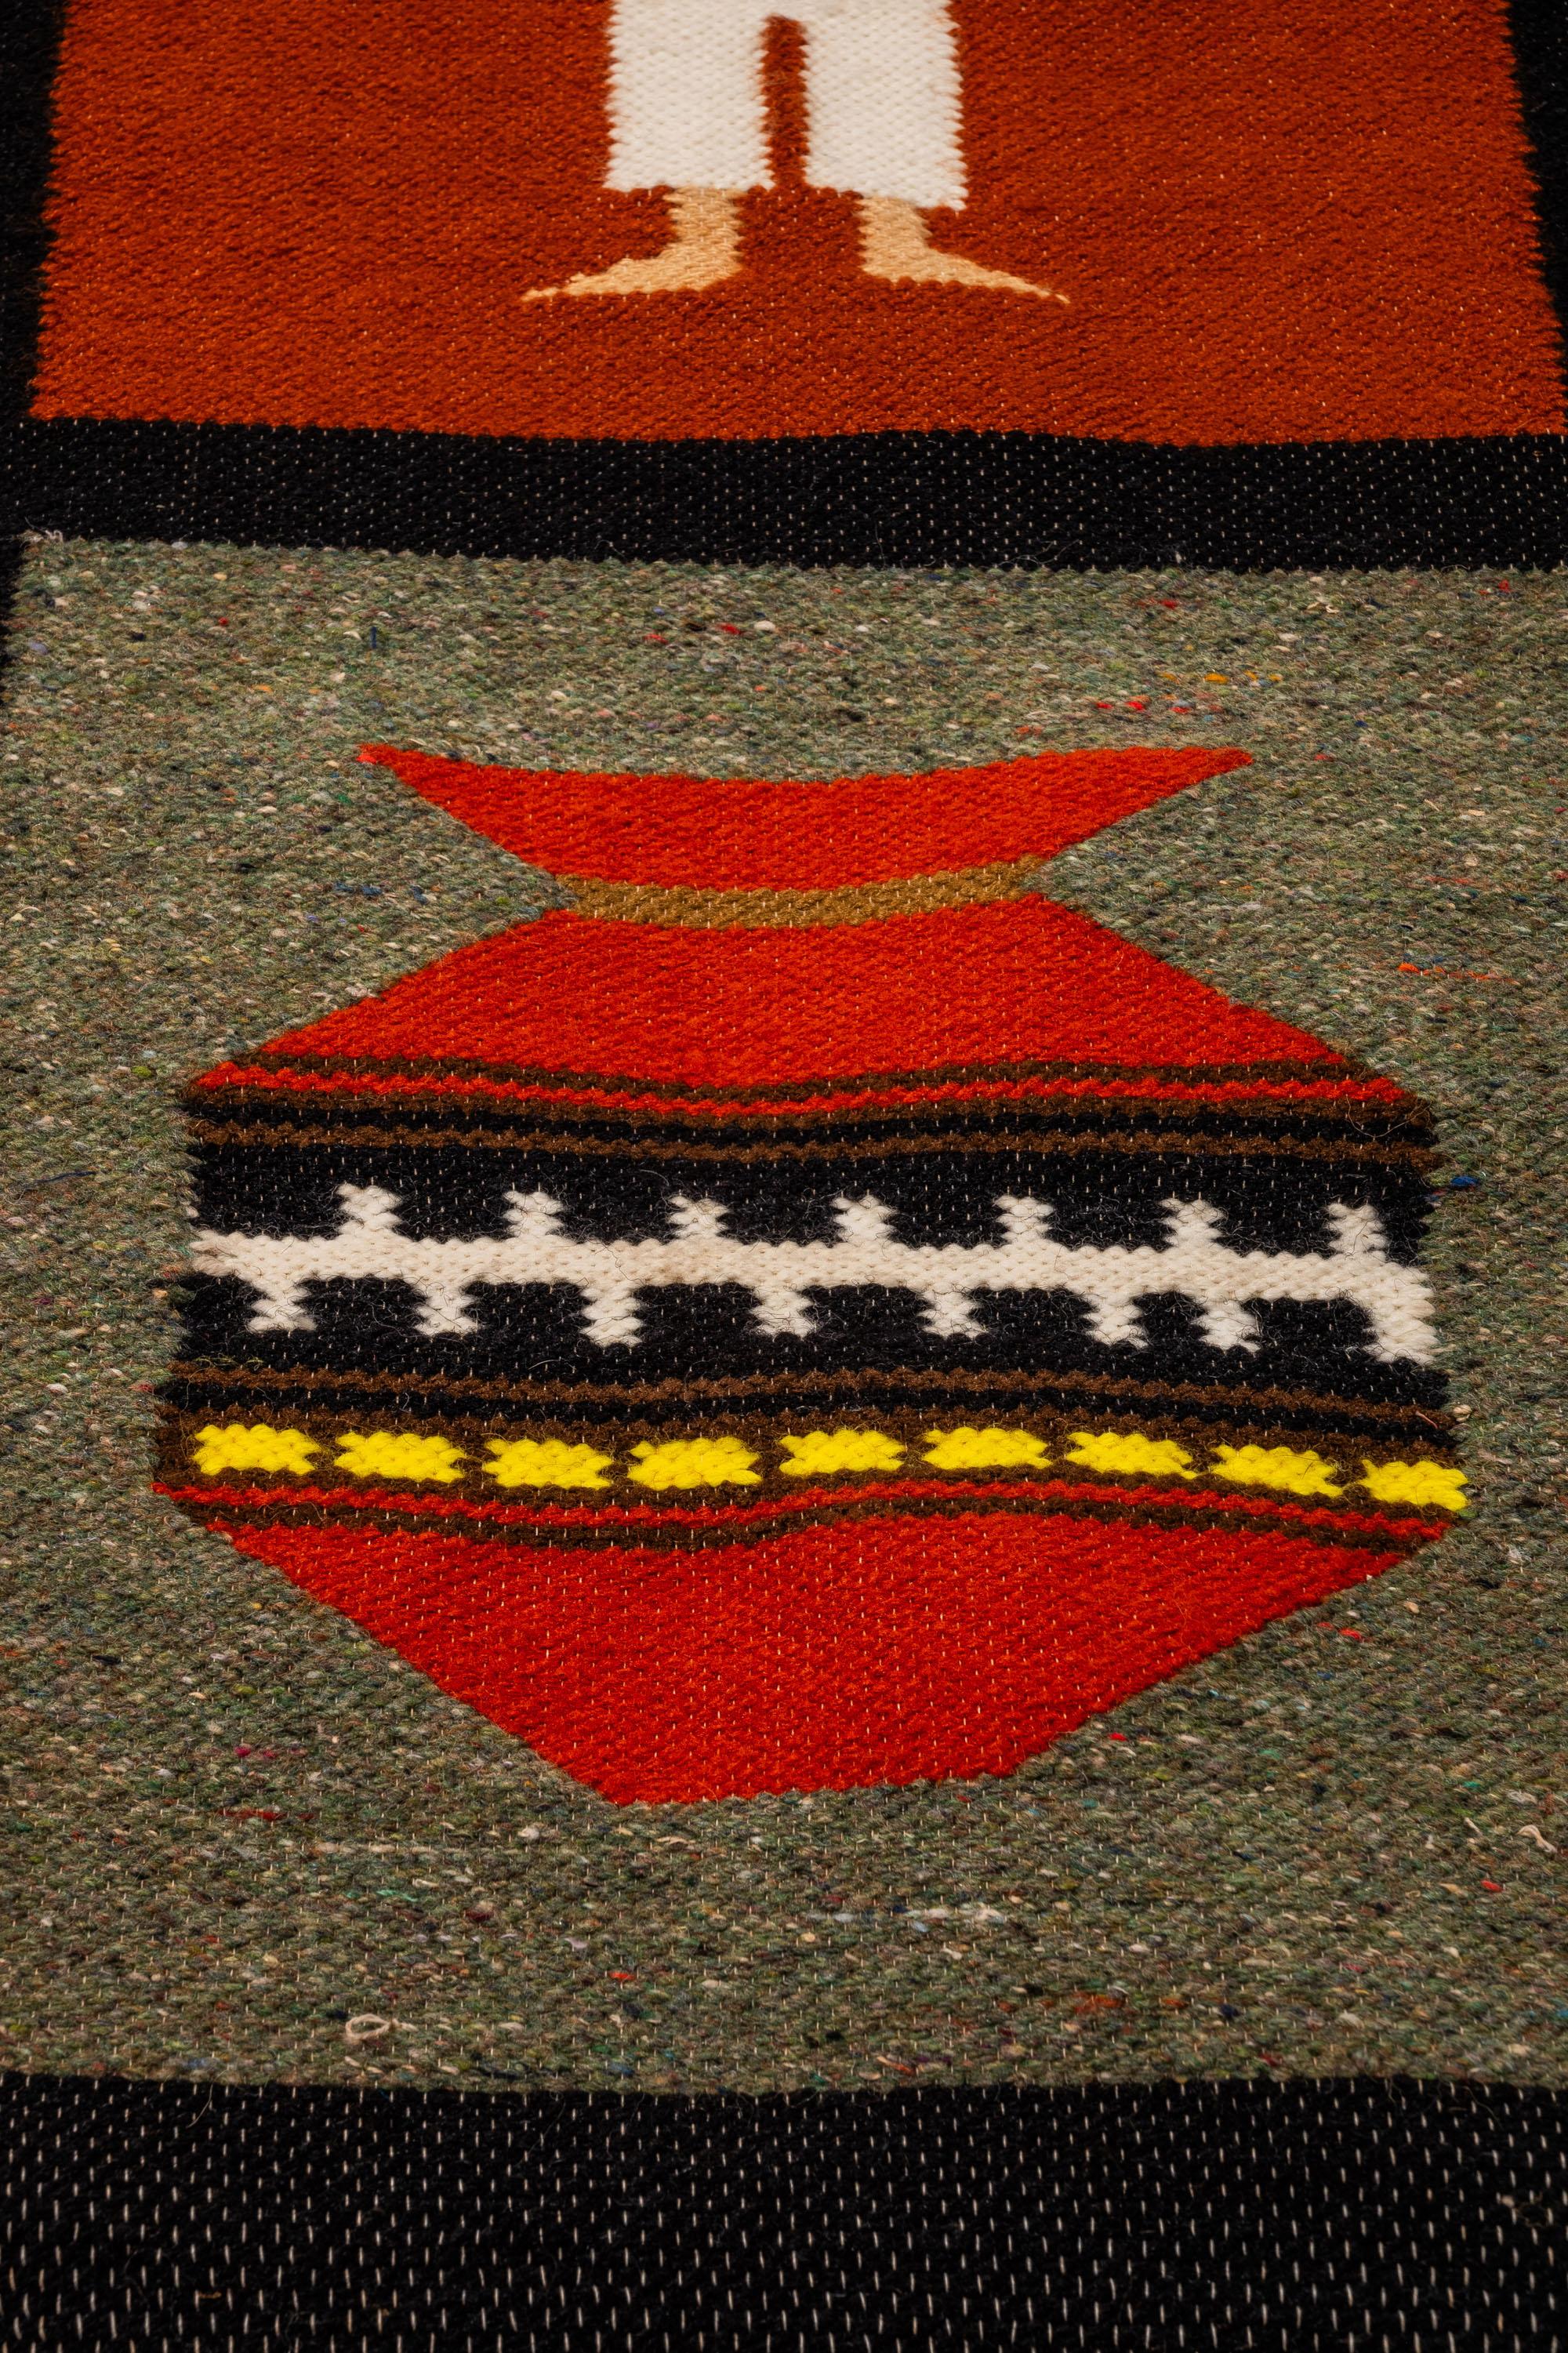  Native America Navajo South West Style Pictorial Rug Tapestry, c. Mid 1900s For Sale 1